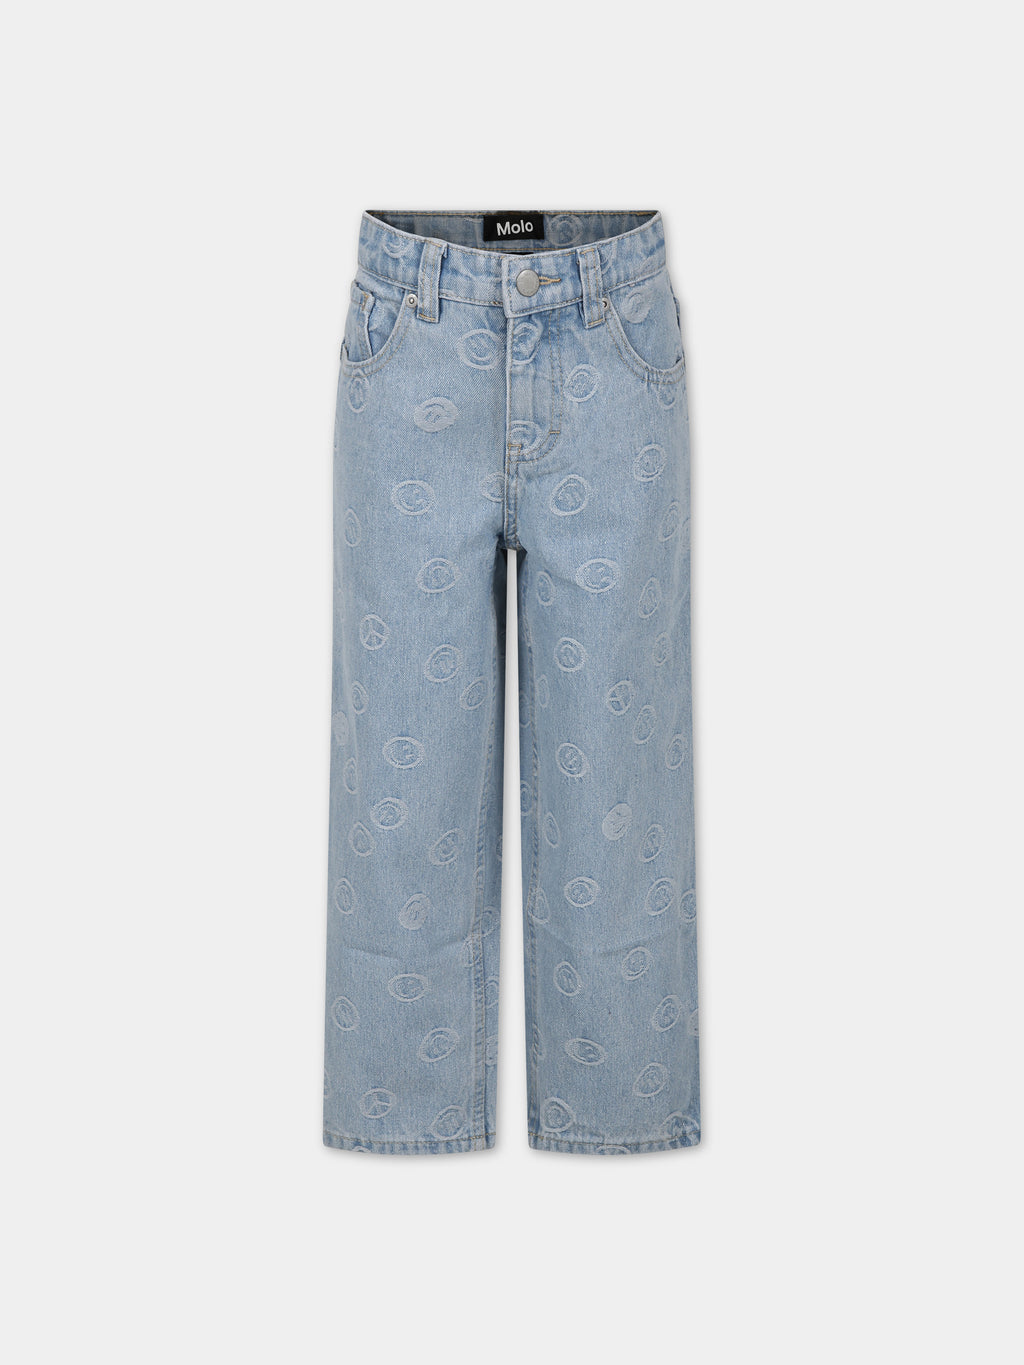 Aiden jeans for kids